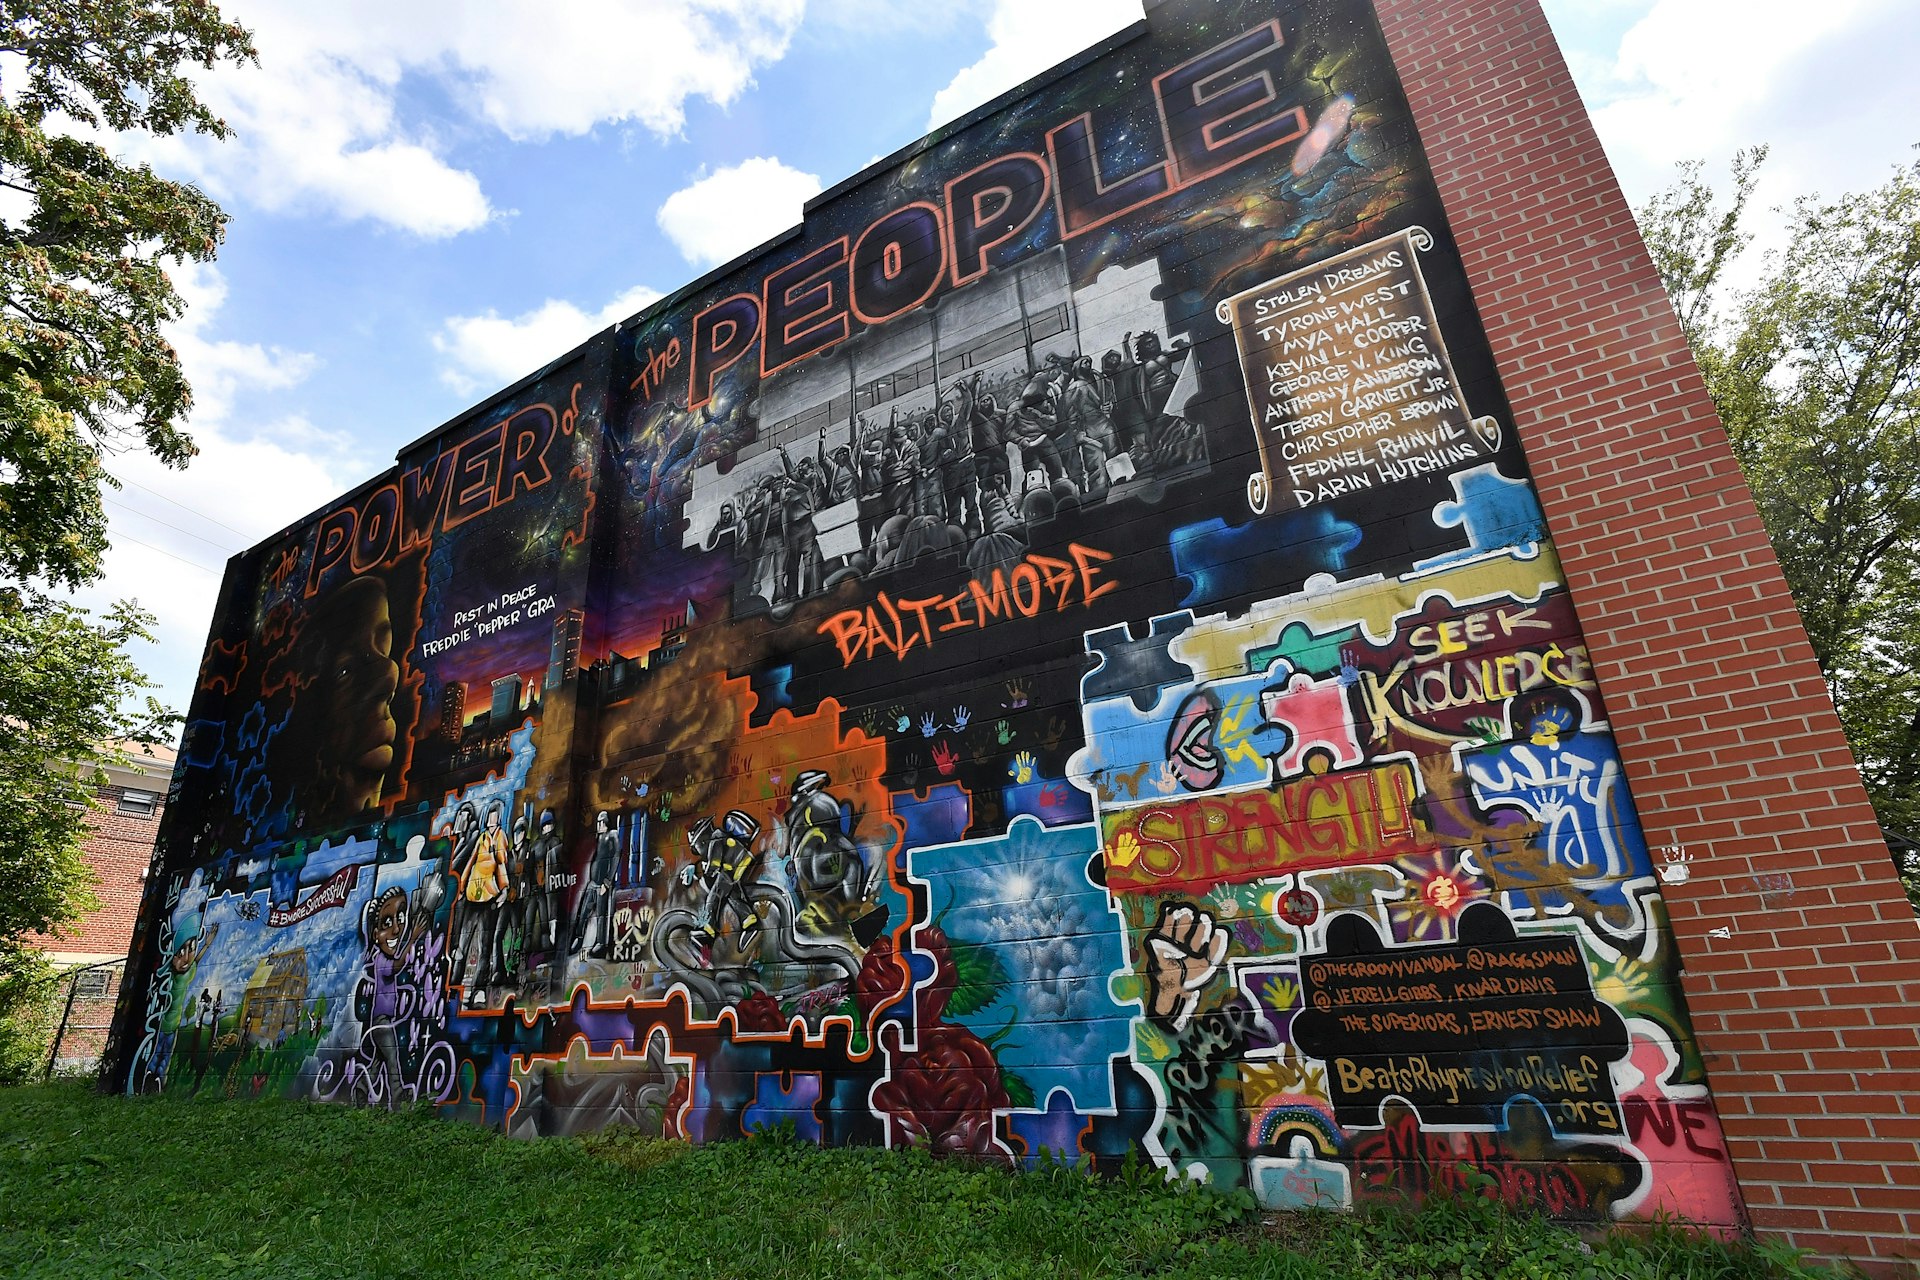 Colorful mural dedicated to Freddie Gray and others who have died in police custody. 